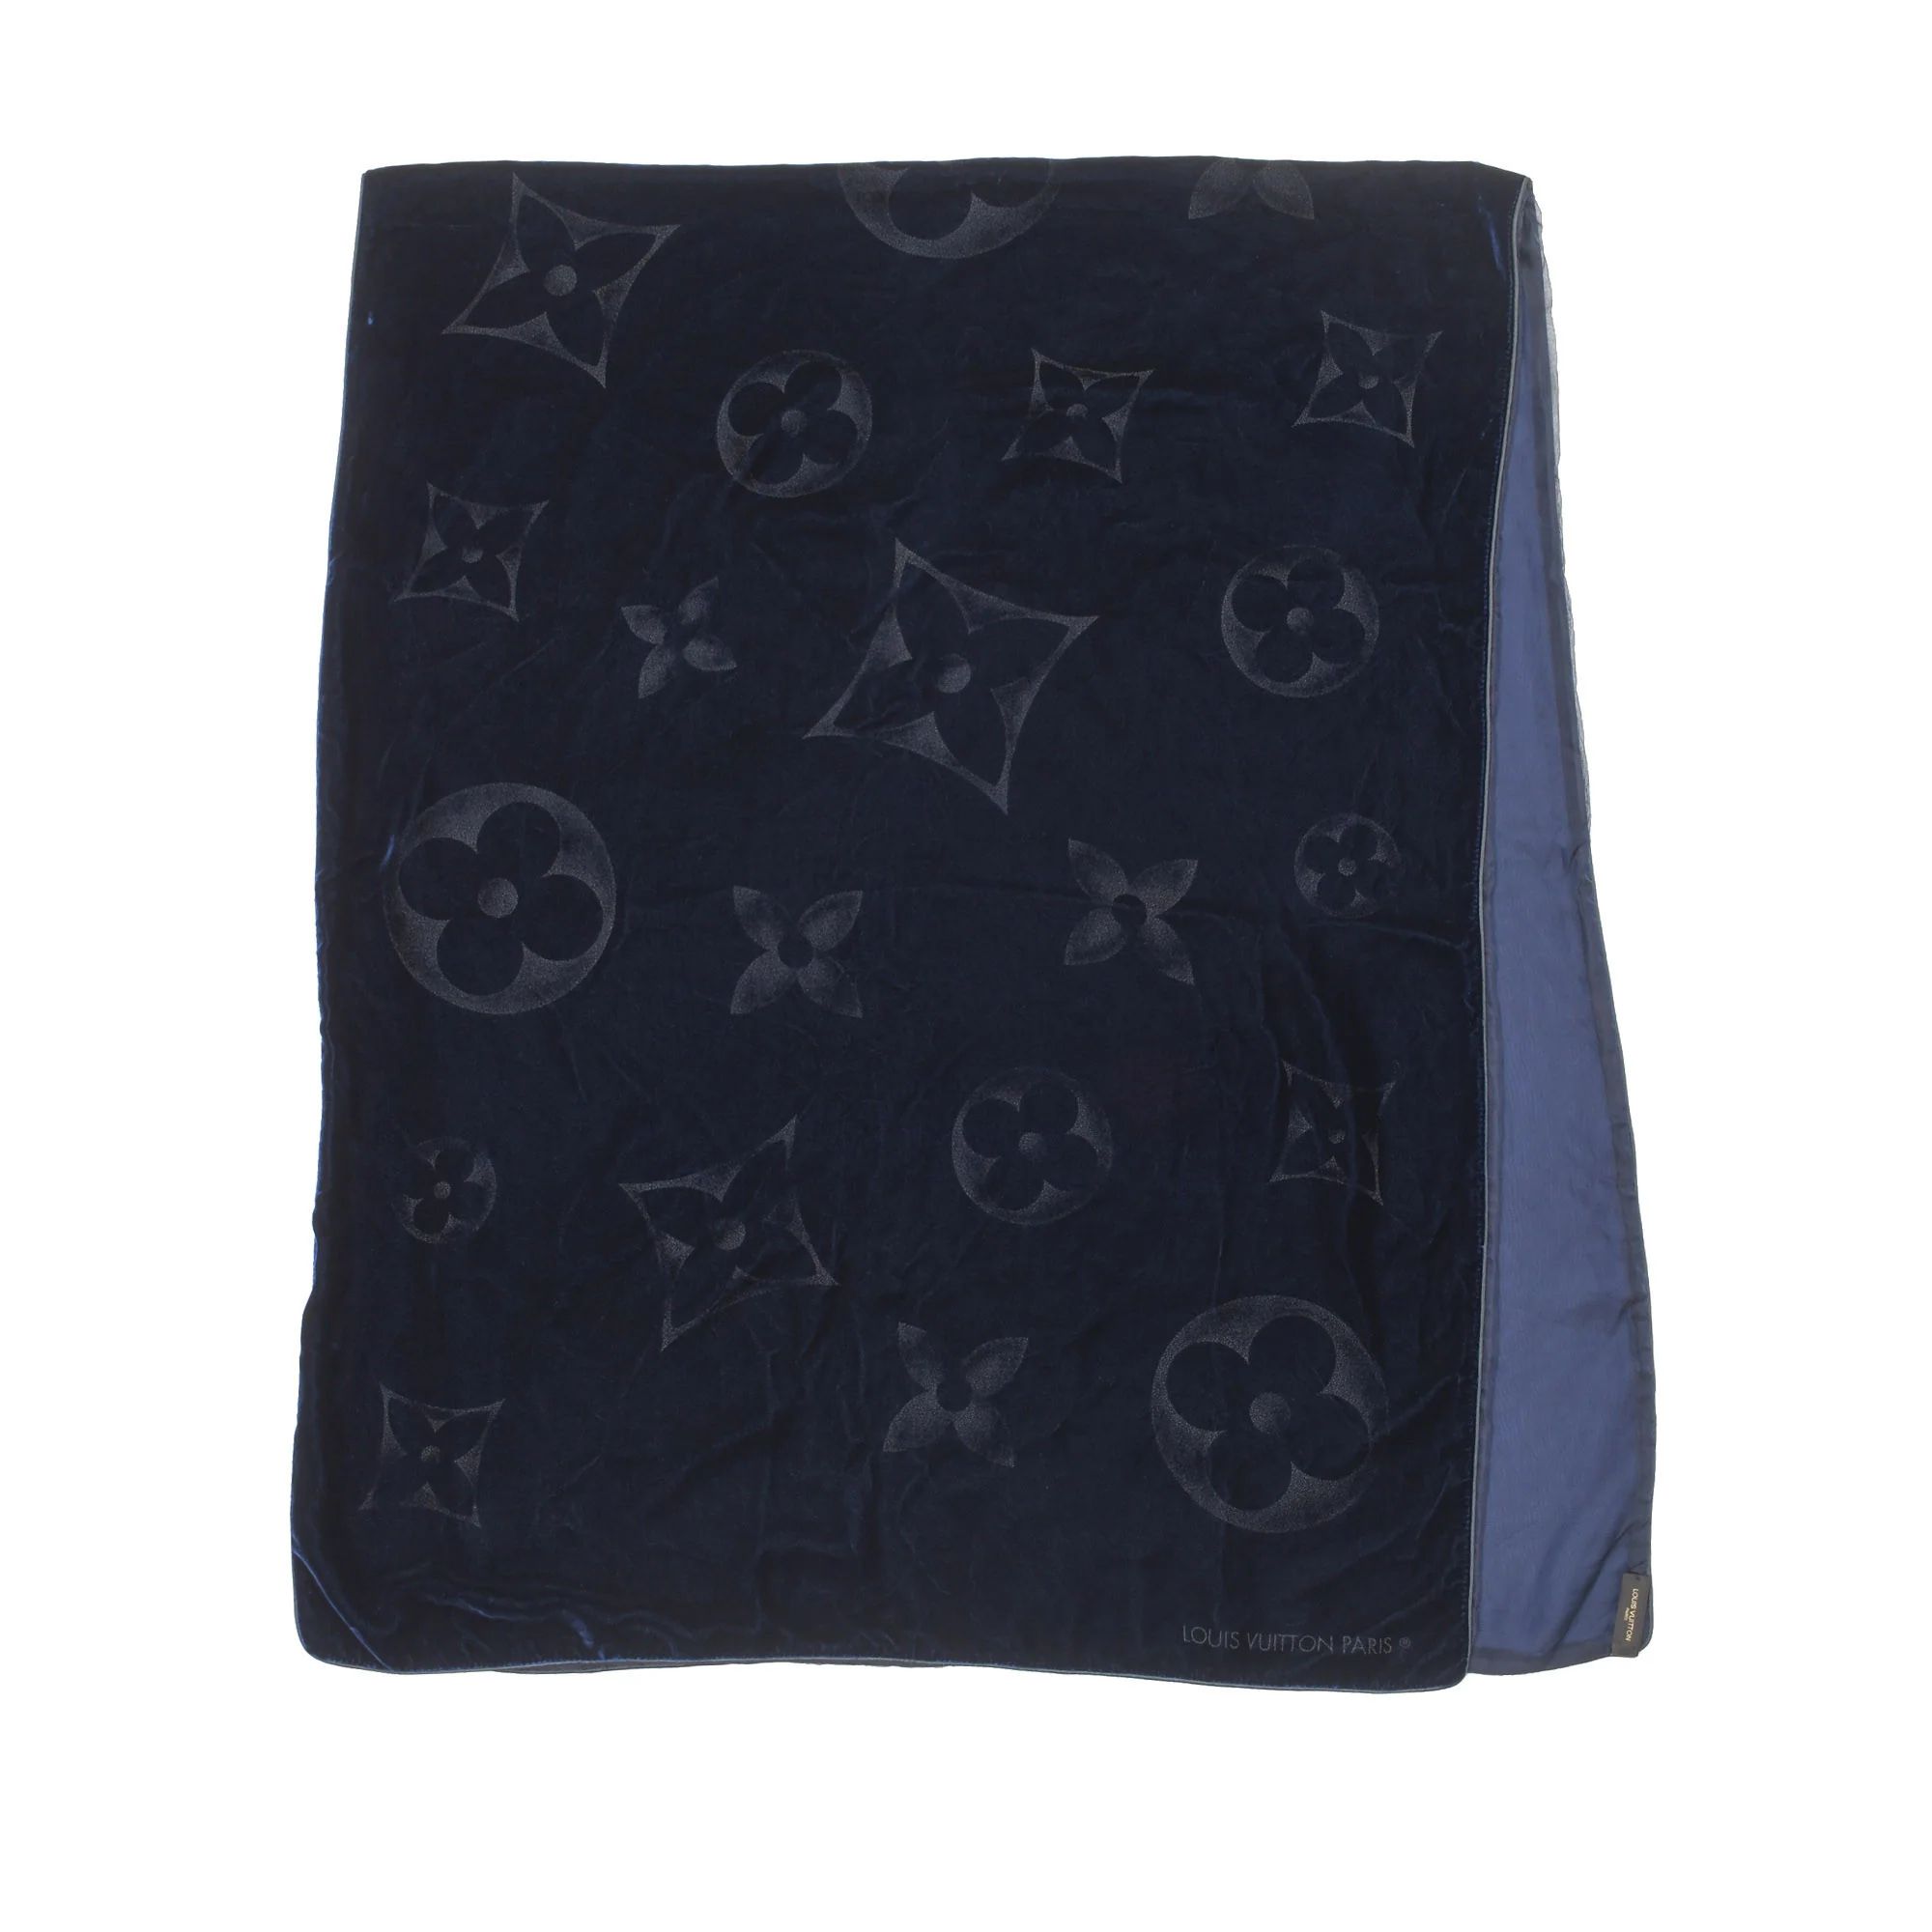 Louis Vuitton Velvet Scarf in Navy Lord & Taylor | Lord & Taylor